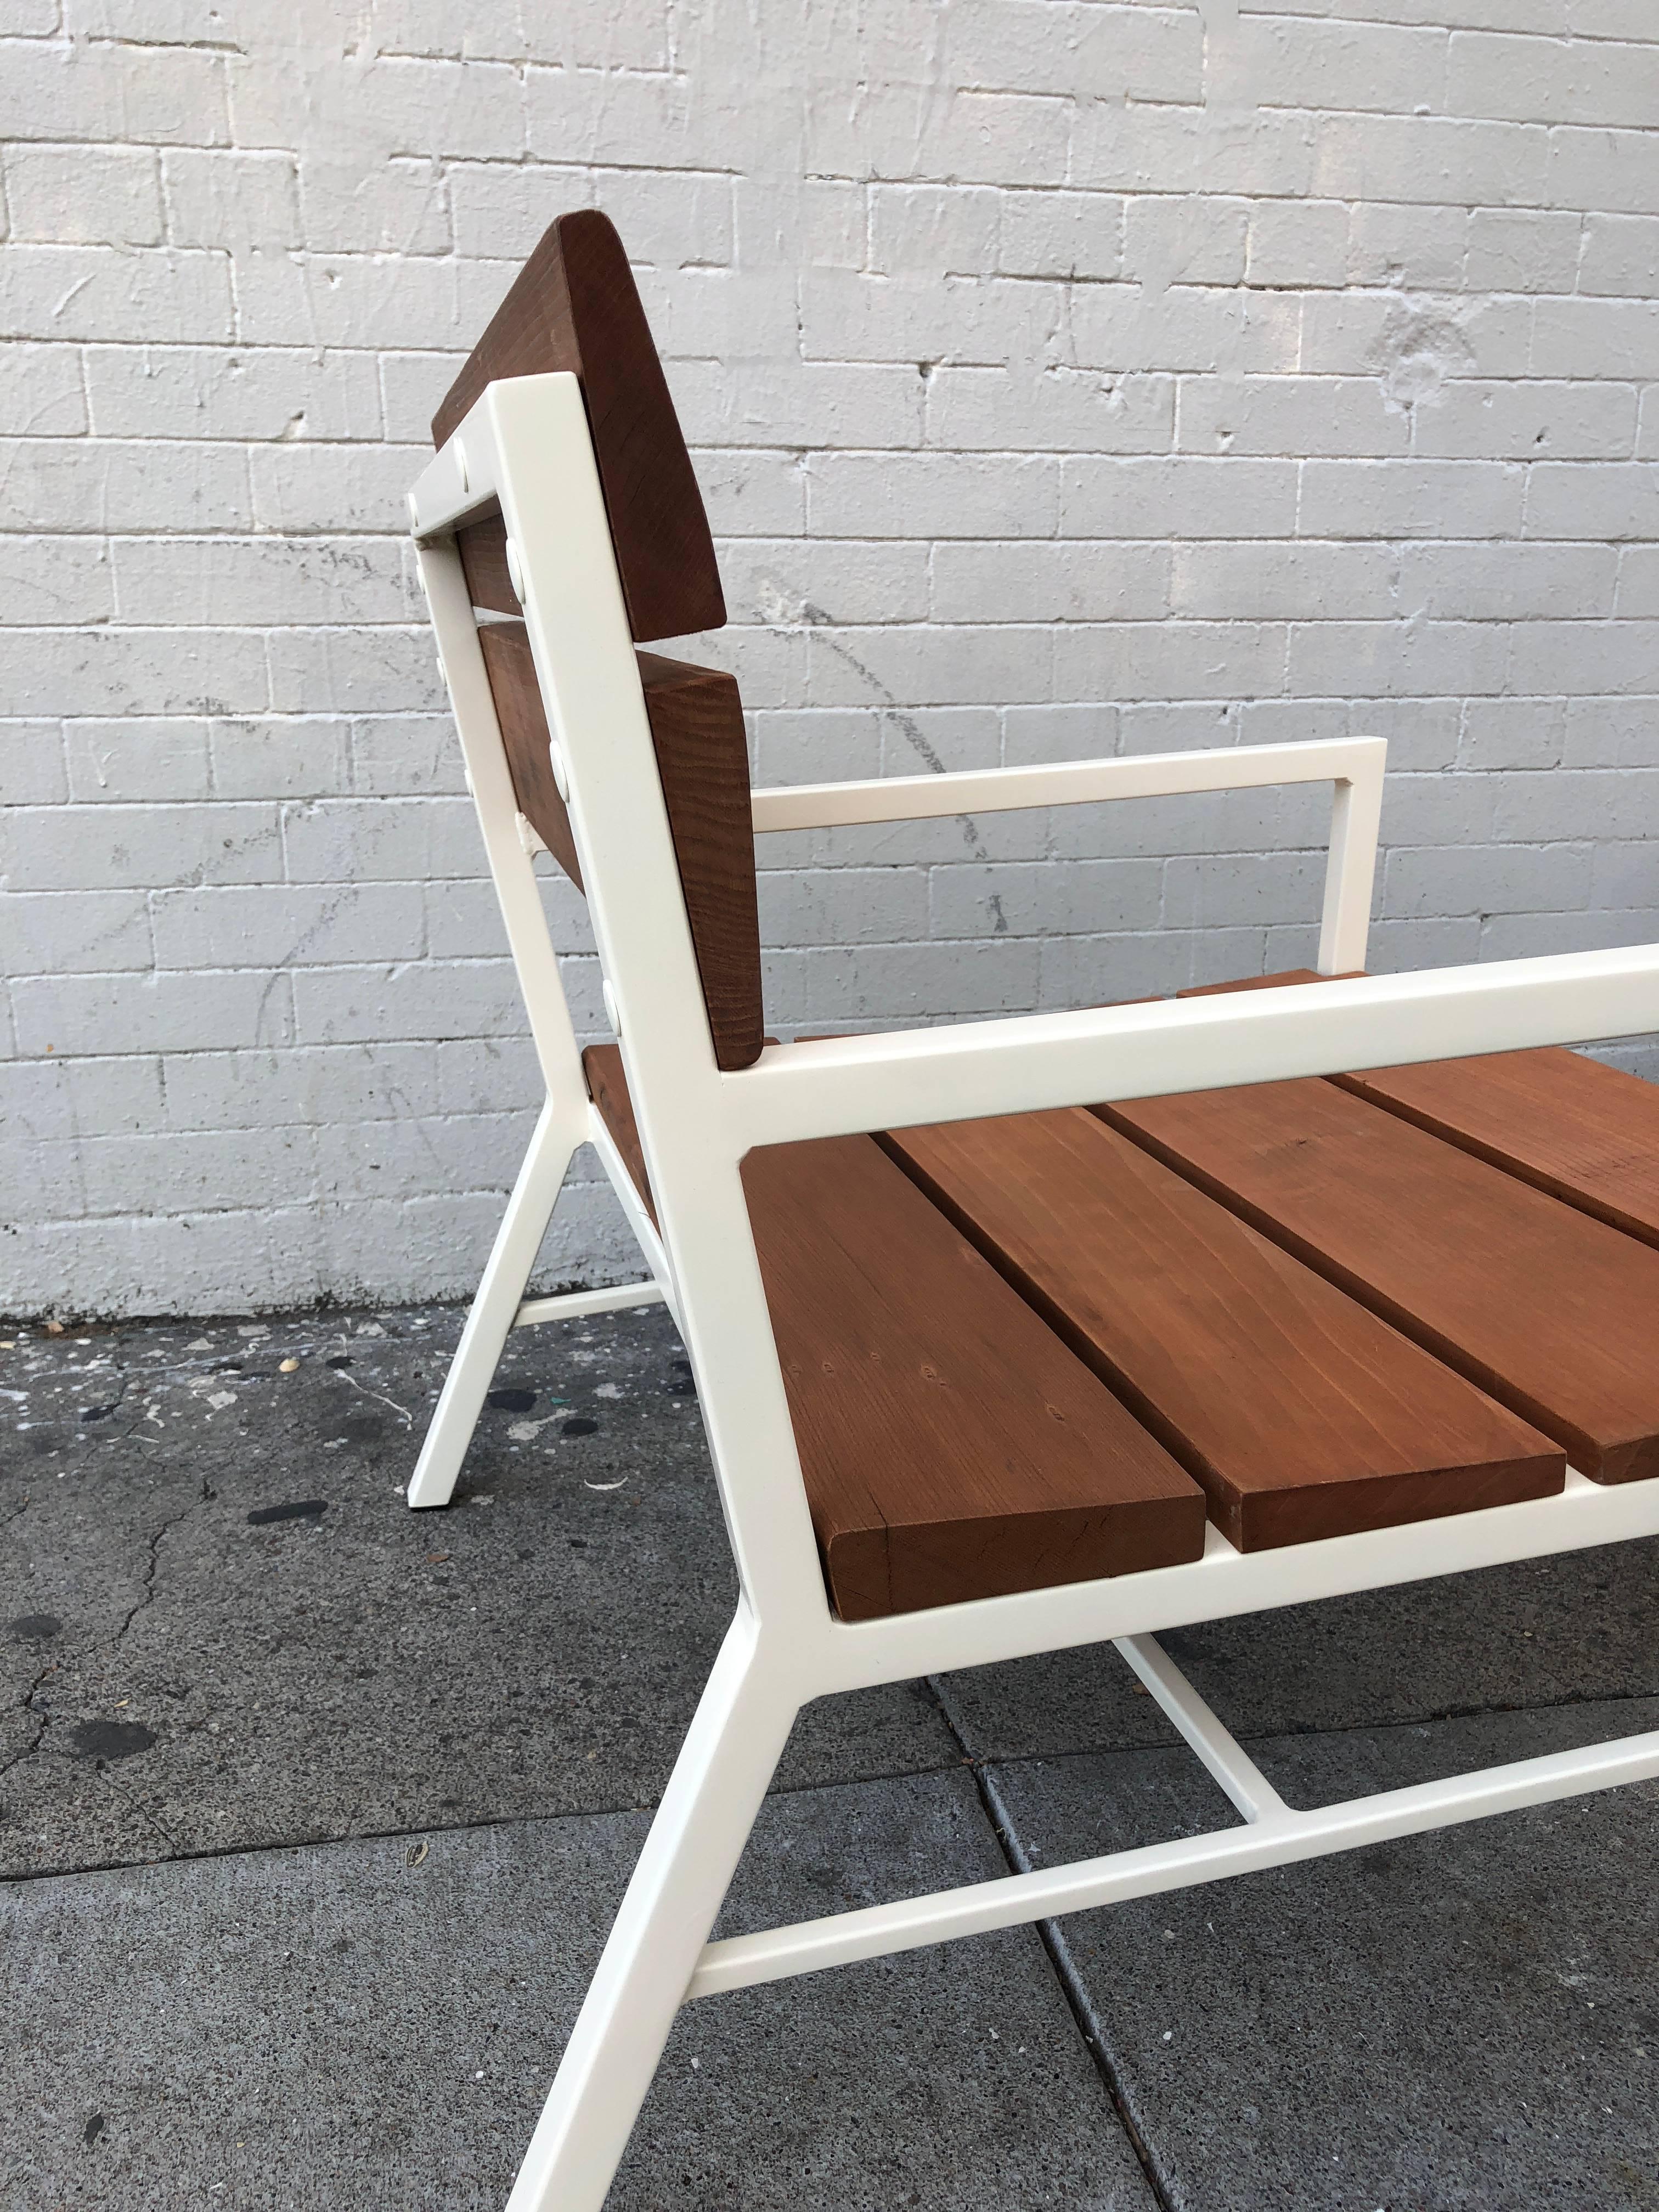 Van Keppel and Green Redwood Lounge Chairs, circa 1960s, California For Sale 1